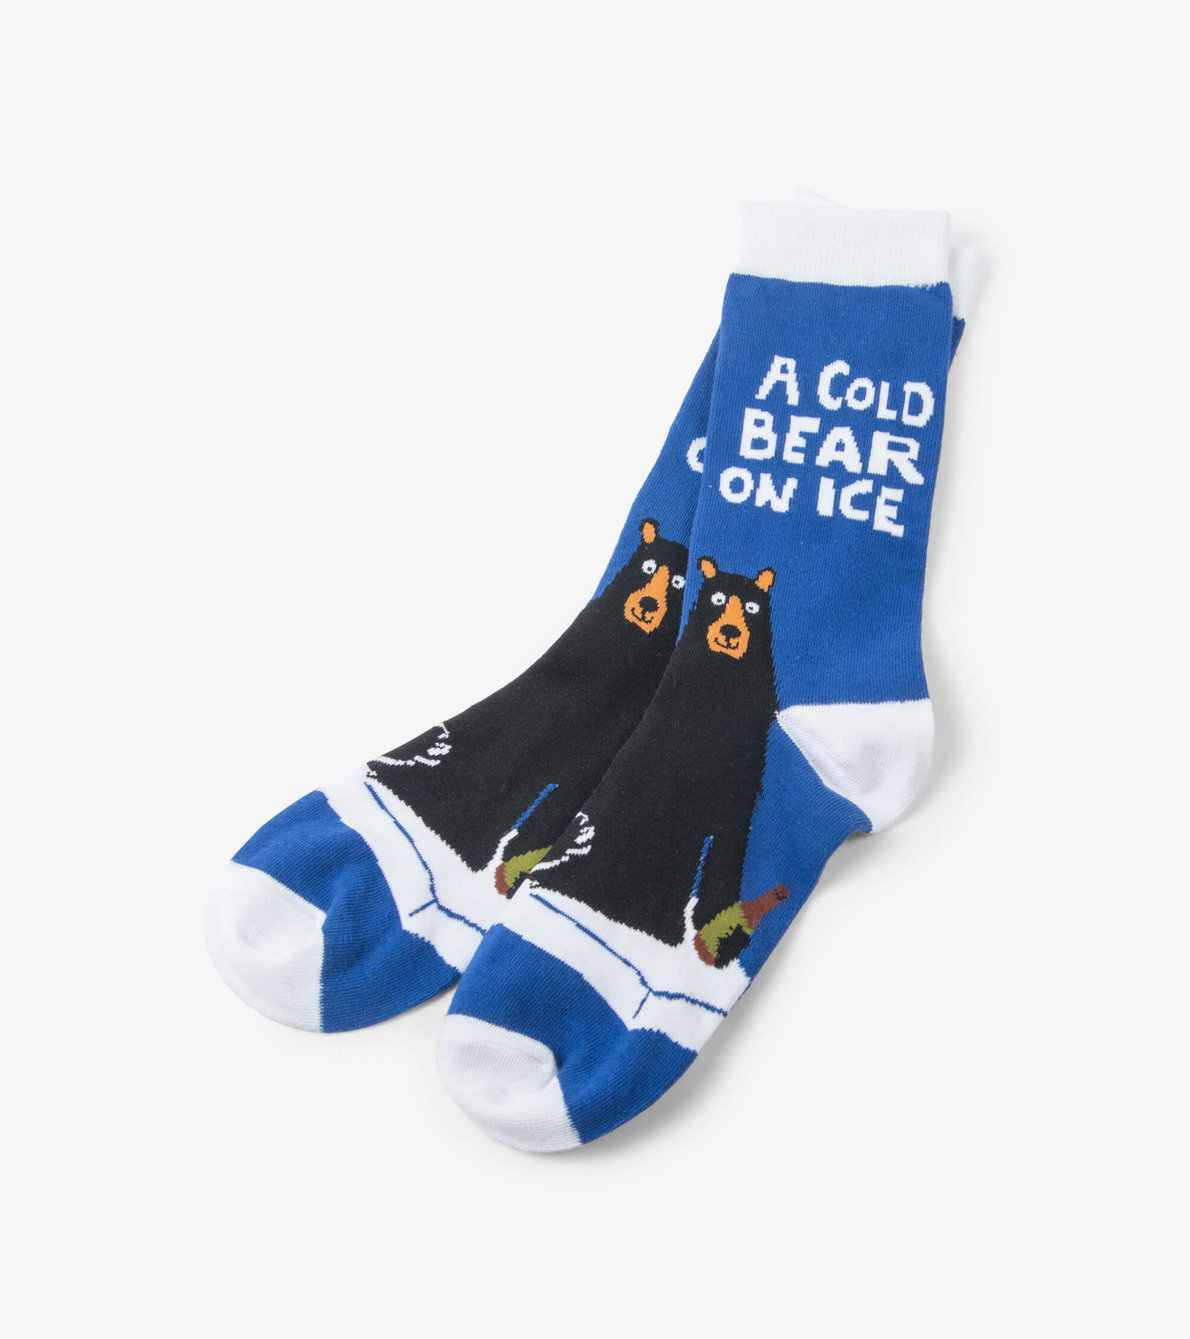 View larger image of A Cold Bear on Ice Men's Crew Socks